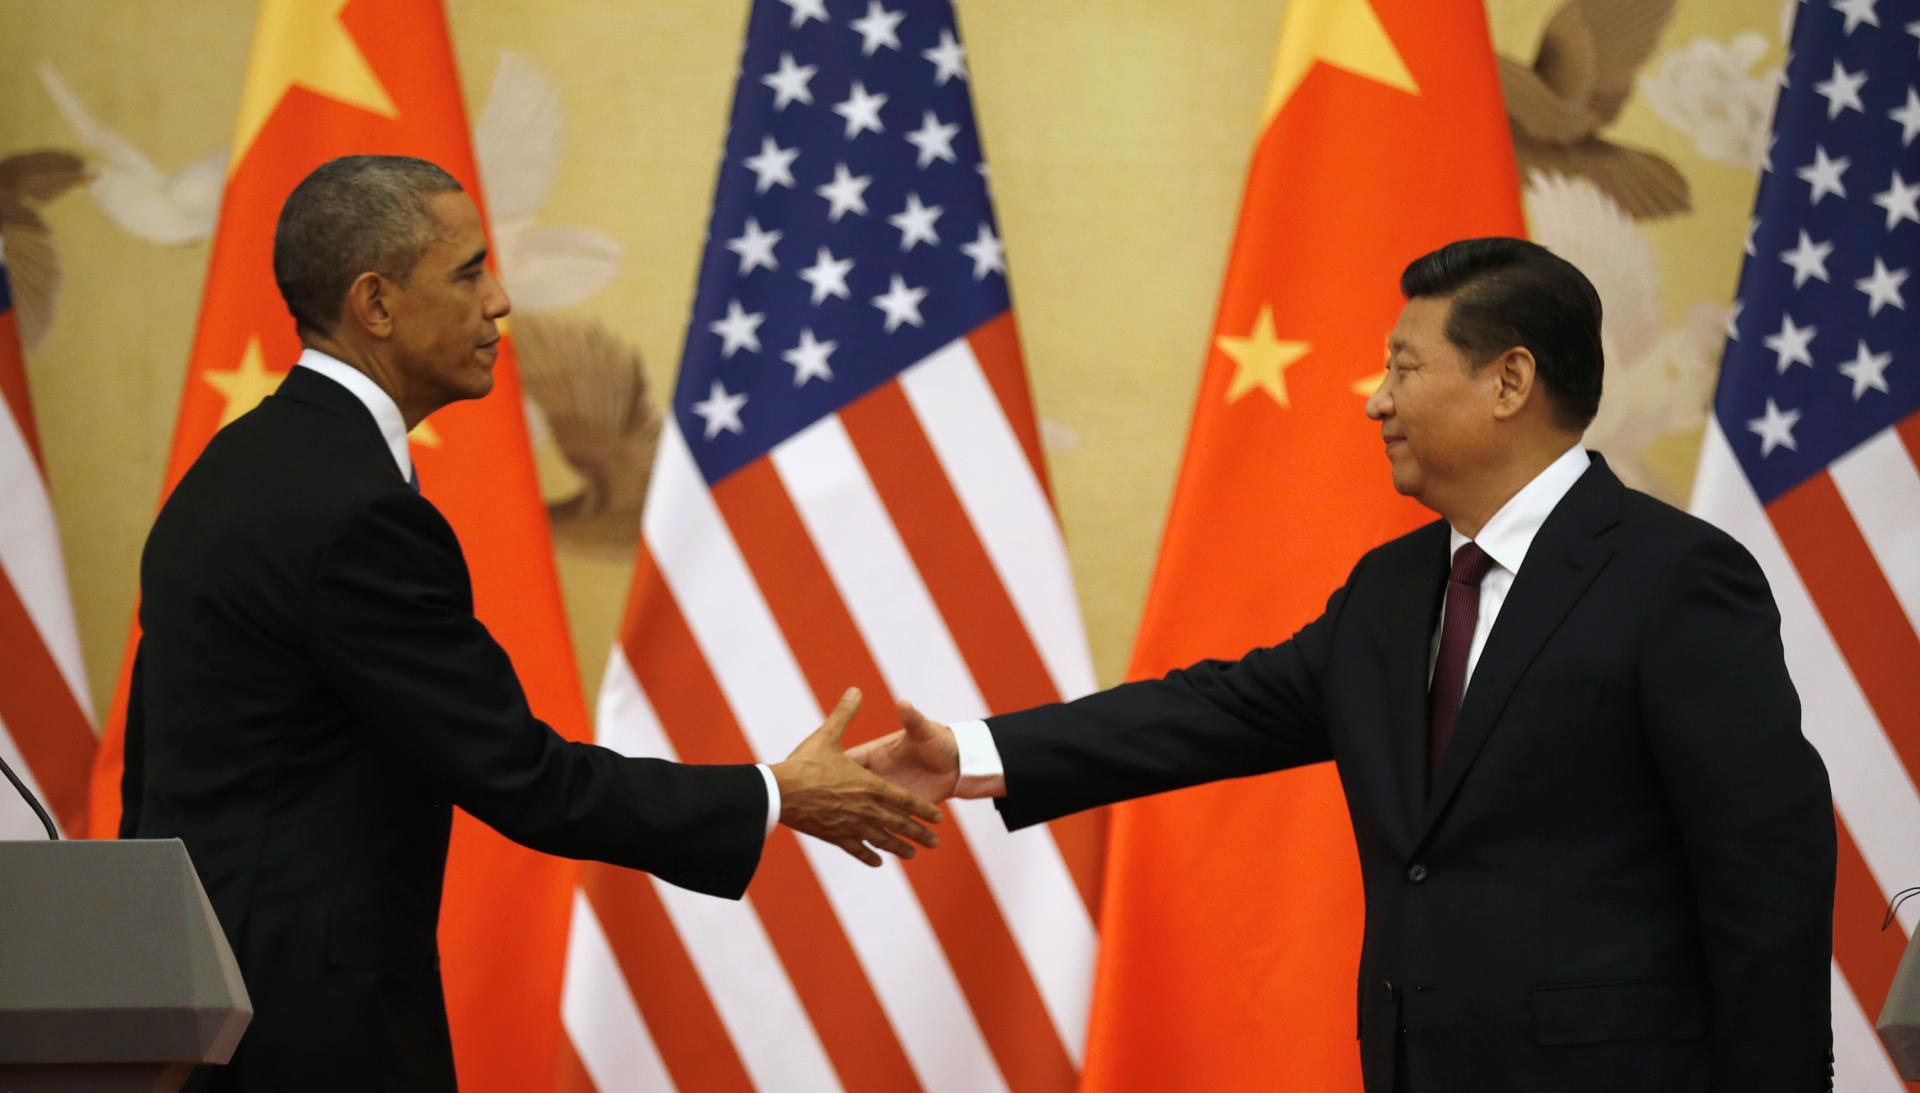 U.S. President Barack Obama and Chinese President Xi Jinping shake hands at the end of their news conference in the Great Hall of the People in Beijing on November 12, 2014. 